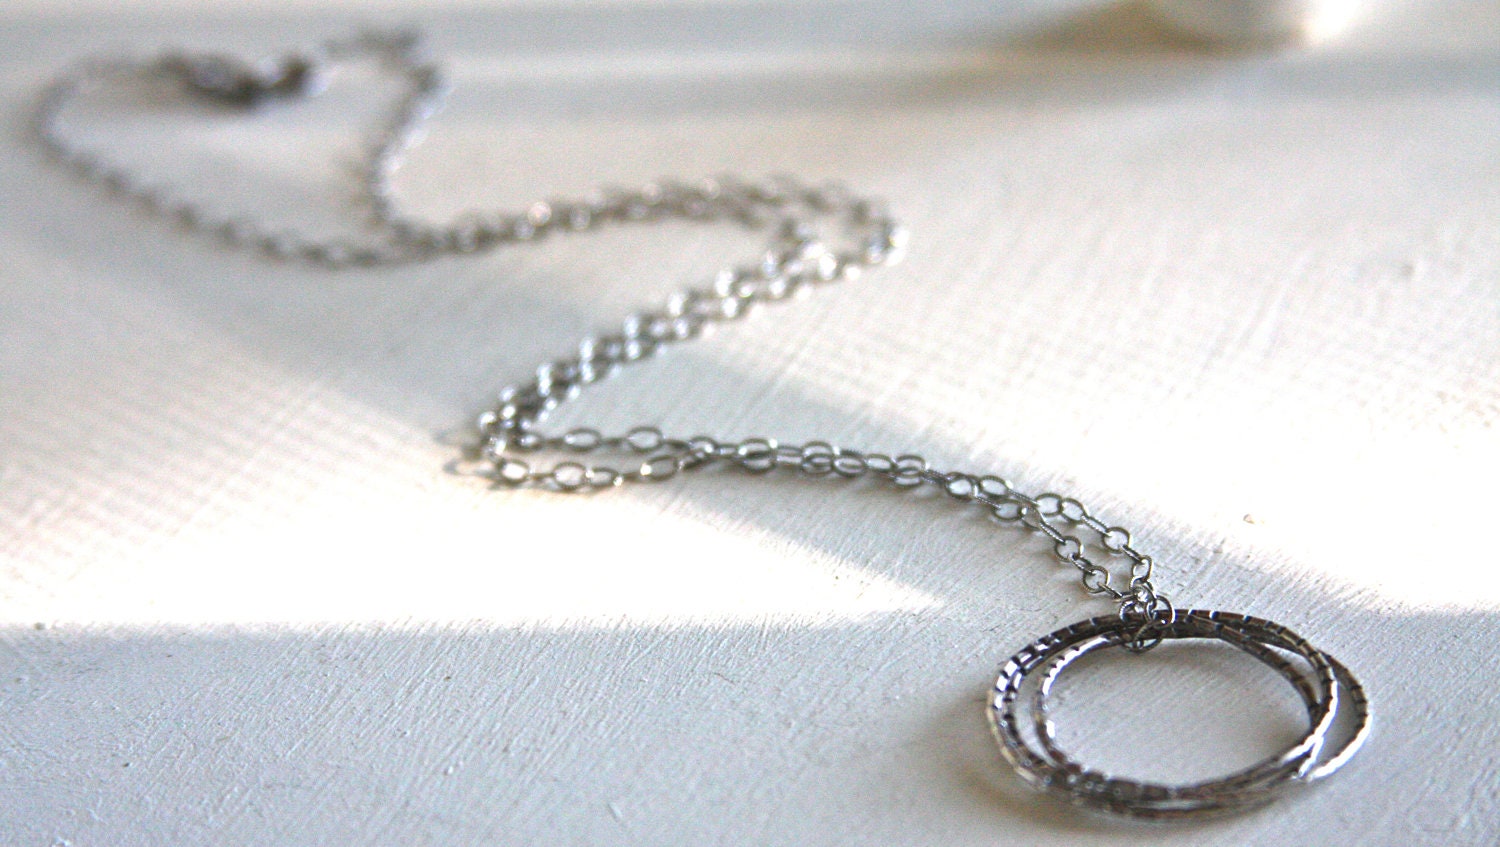 Long oxidized sterling silver necklace with 3 large interlocking oxidized sterling silver rings. - HollyMackDesigns